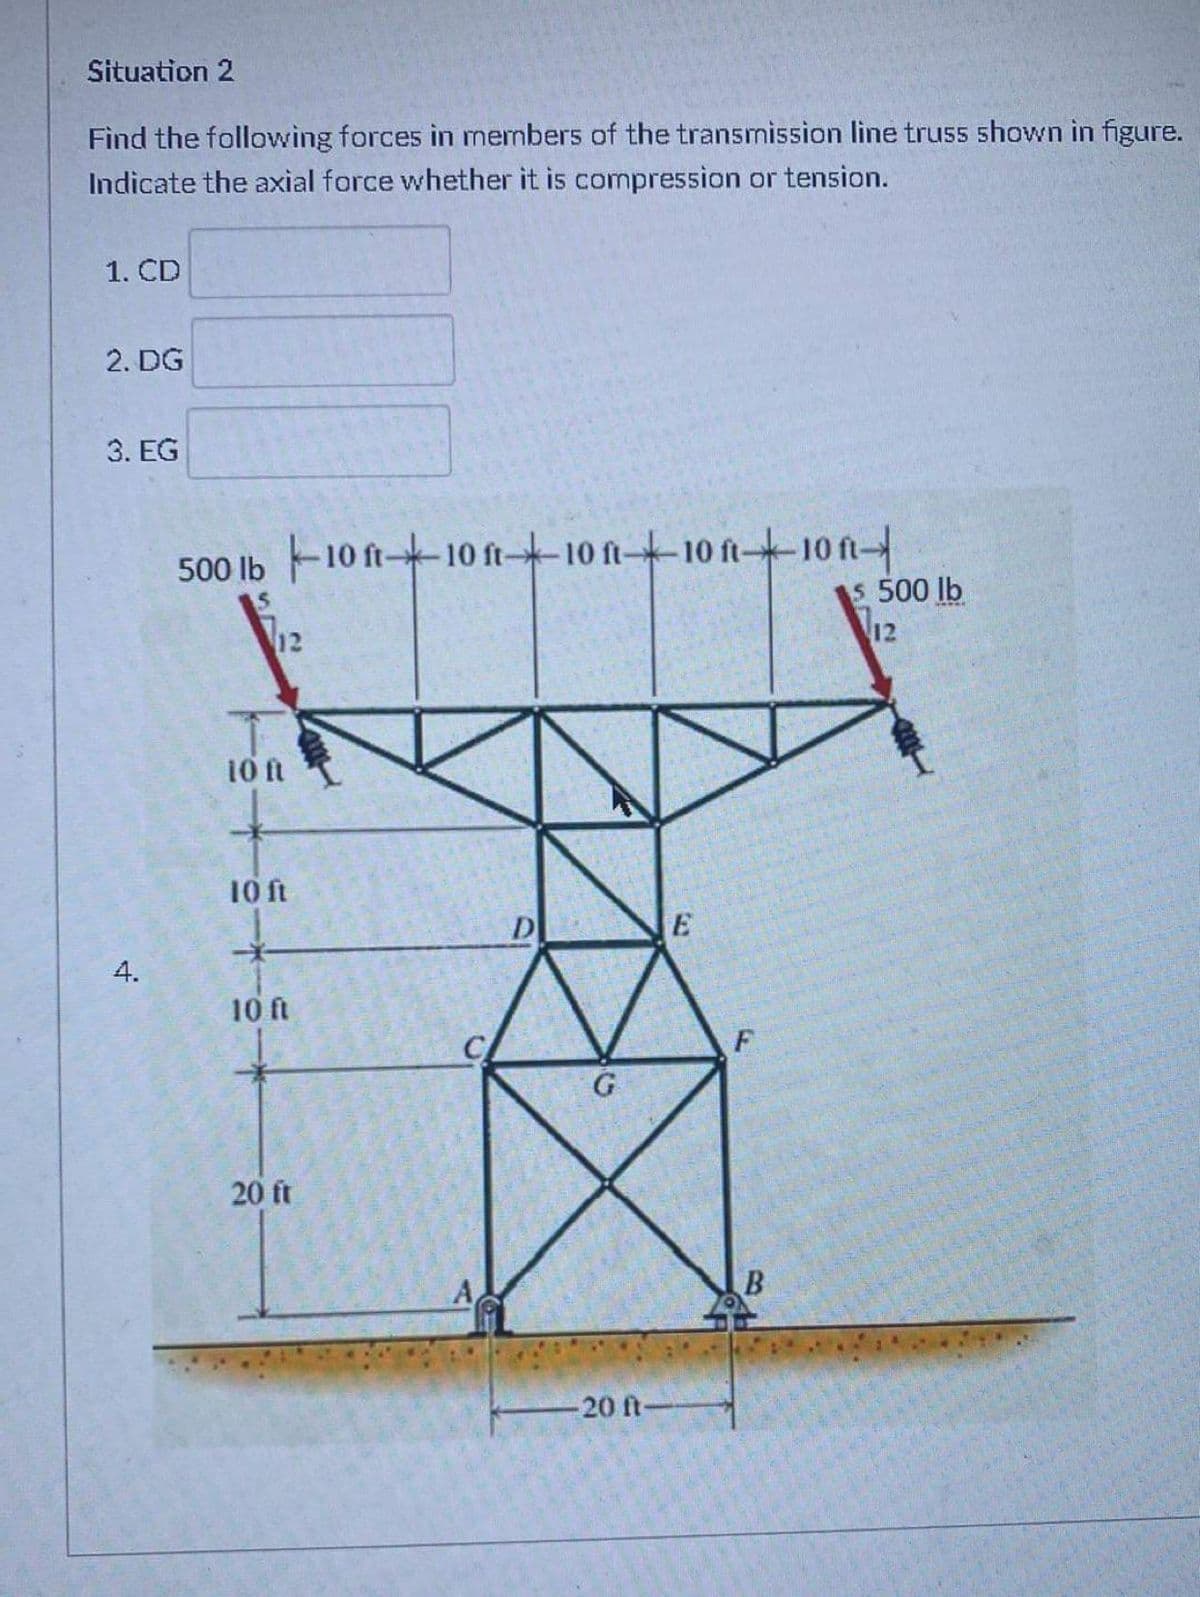 Situation 2
Find the following forces in members of the transmission line truss shown in figure.
Indicate the axial force whether it is compression or tension.
1. CD
2. DG
3. EG
500 Ib 10 ft--10 ft--10 ft-10 ft-10 ft
5 500 lb
12
12
10 ft
10 ft
D
E
4.
10 ft
F
20 ft
-20 ft-
